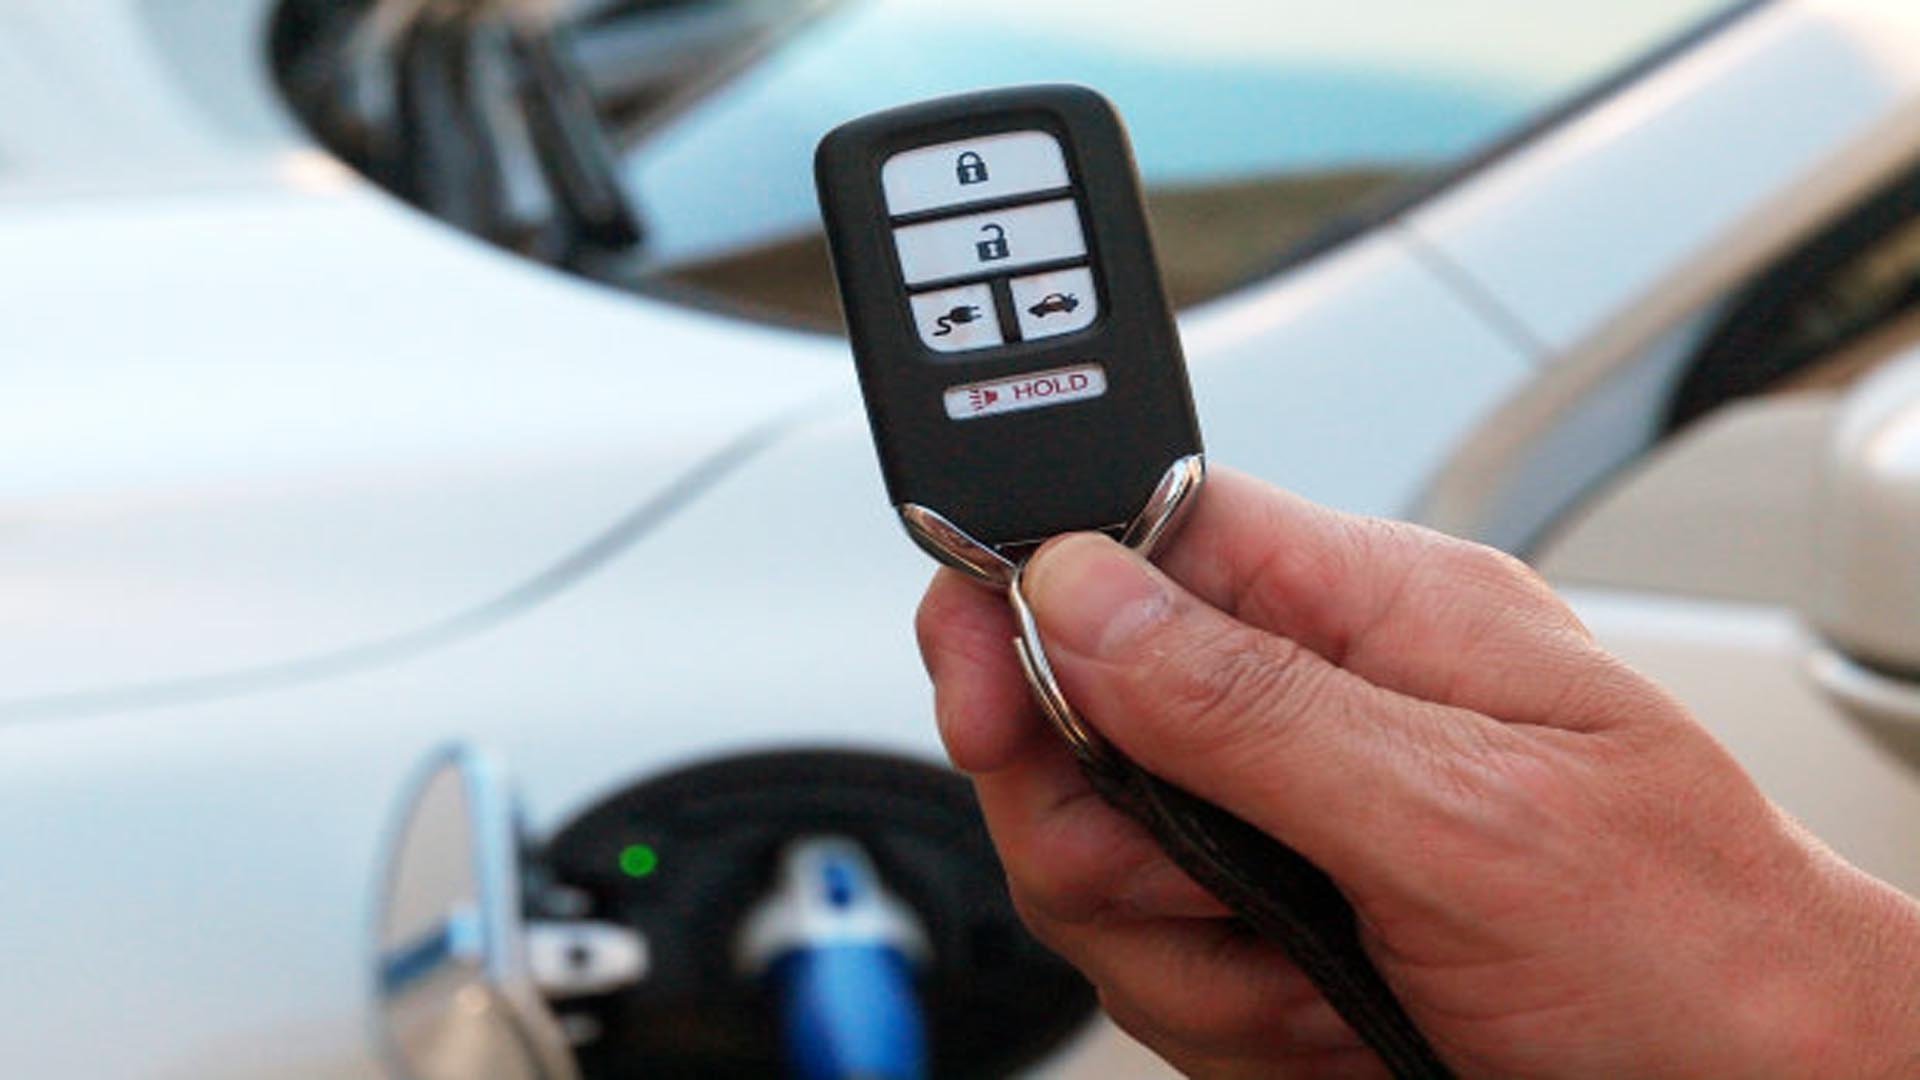 Is there a Best Aftermarket Replacement Battery for your Honda Key Fob Remote?